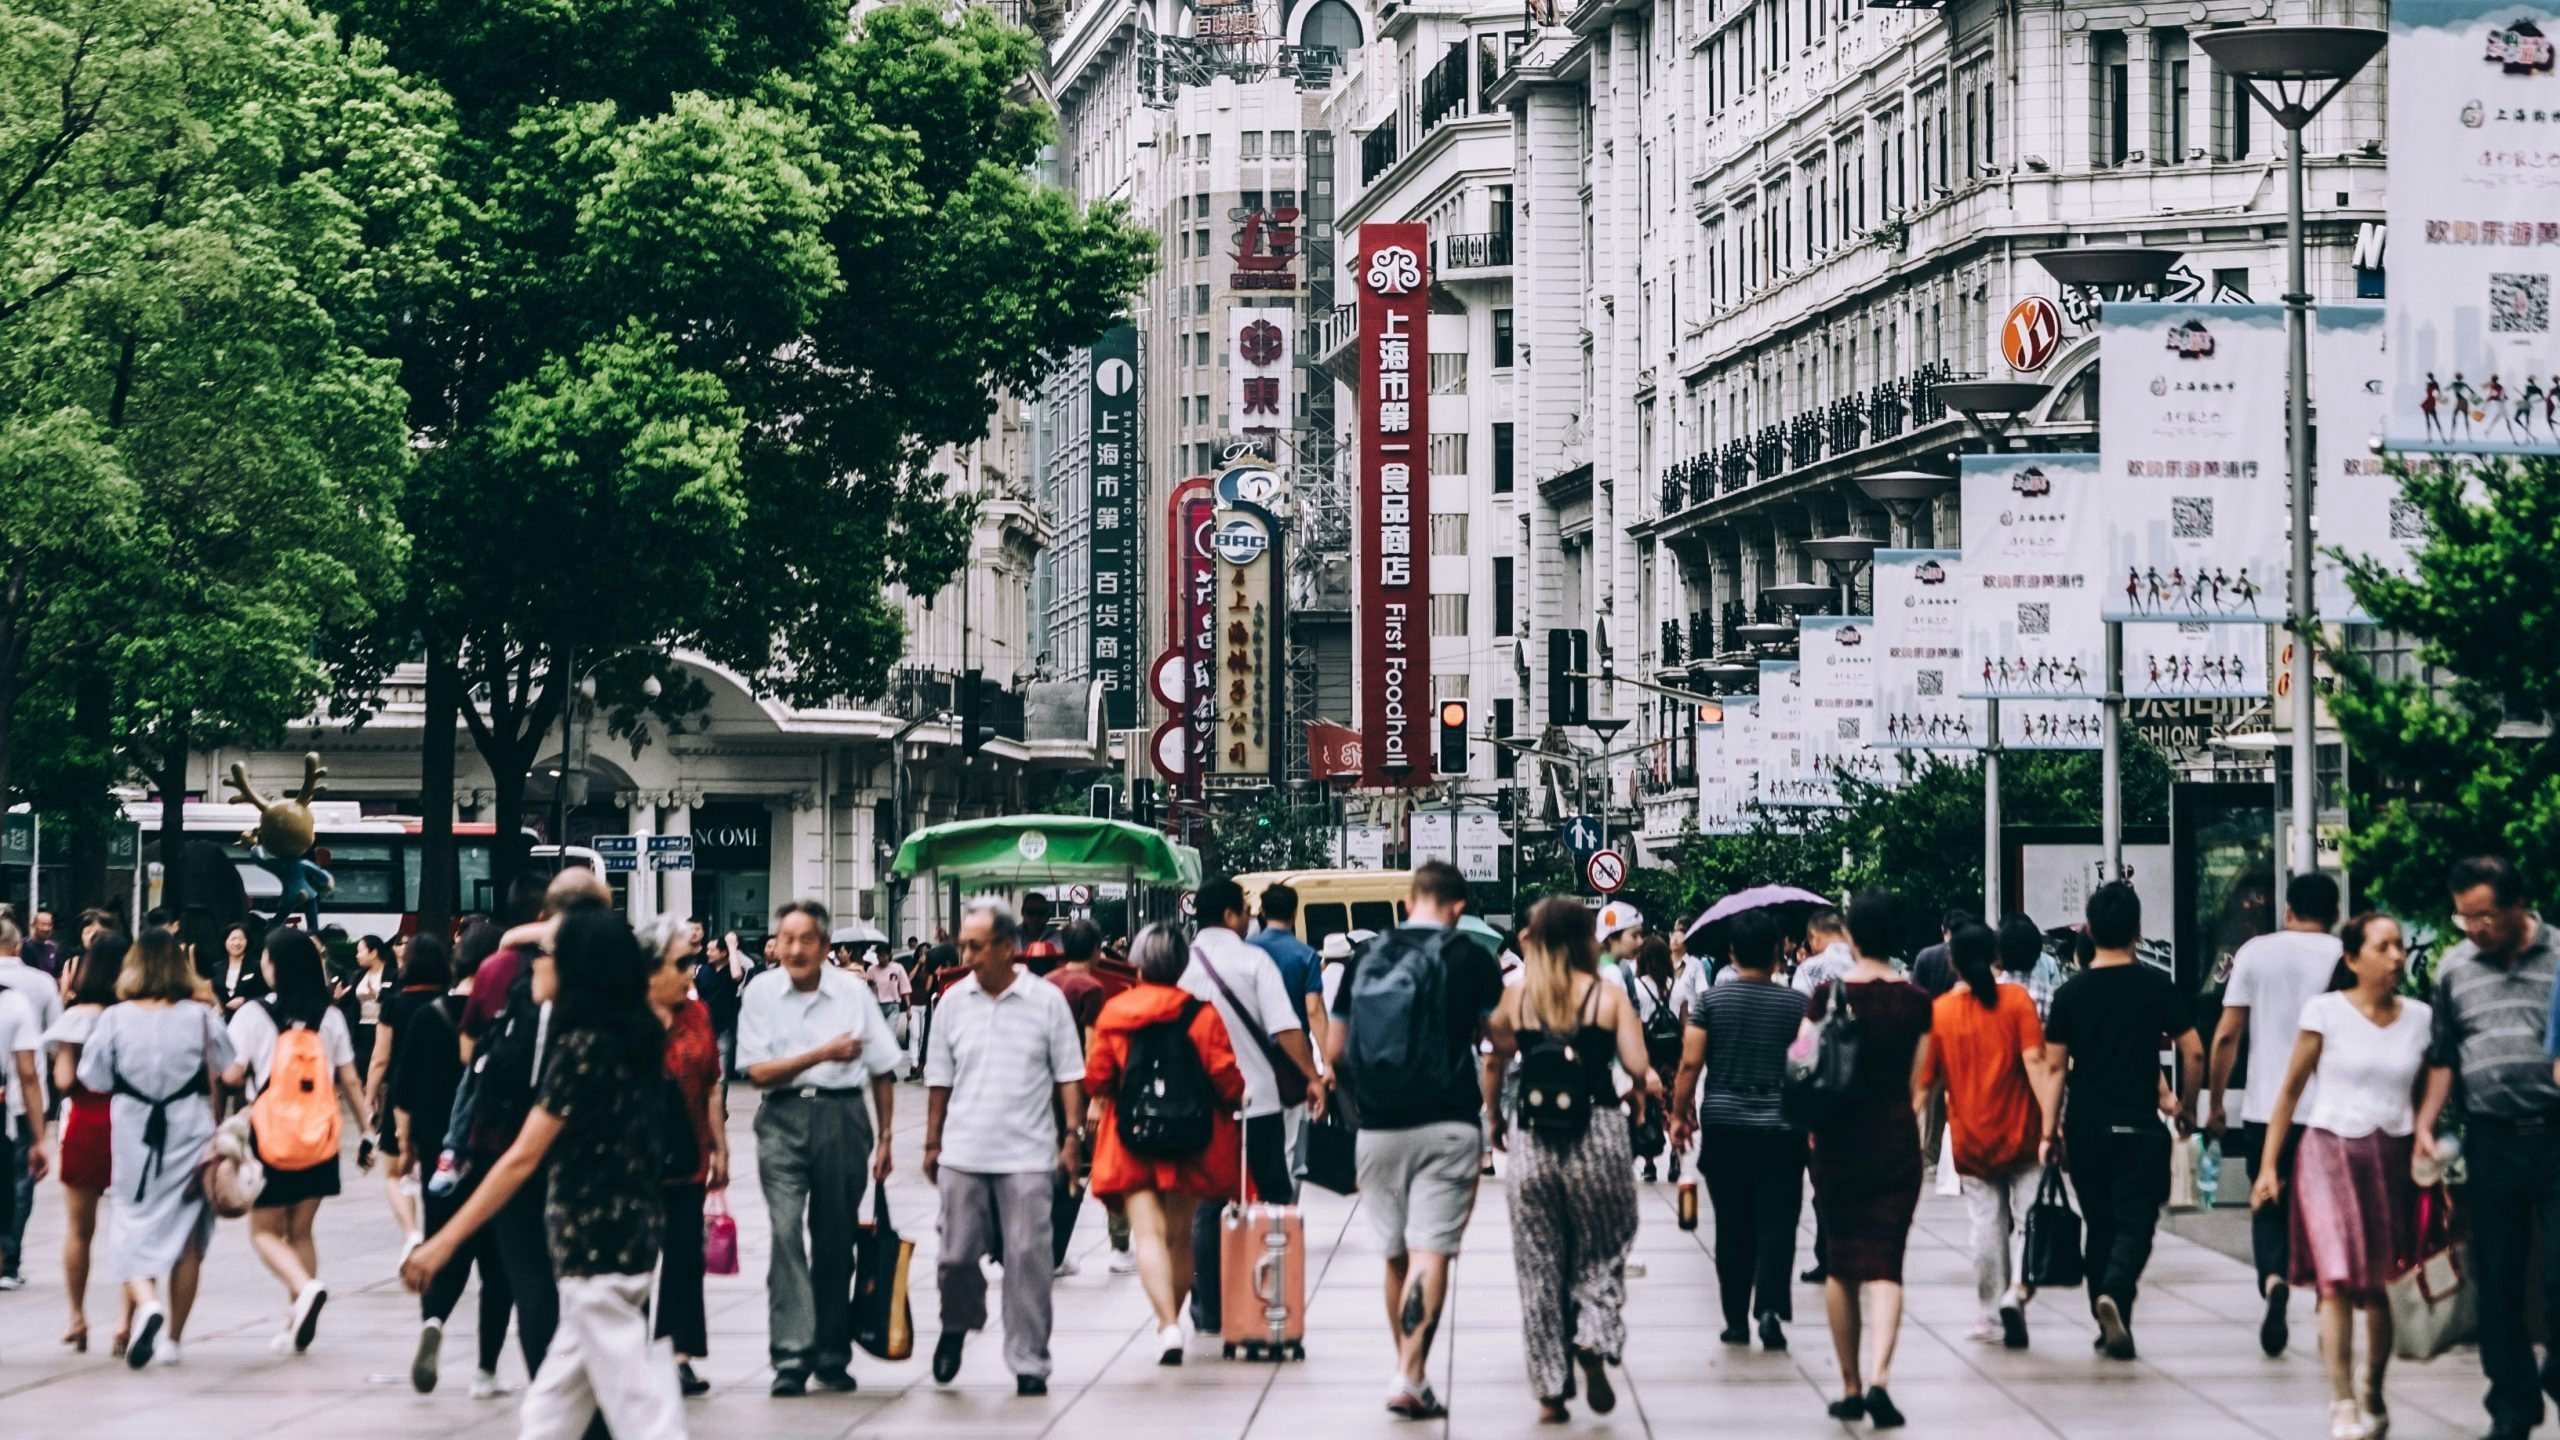 Bain & Co.'s latest report forecasts that the luxury market will grow 5-12% in 2023, thanks to China. Which categories are the most popular among Chinese shoppers? Photo: Unsplash